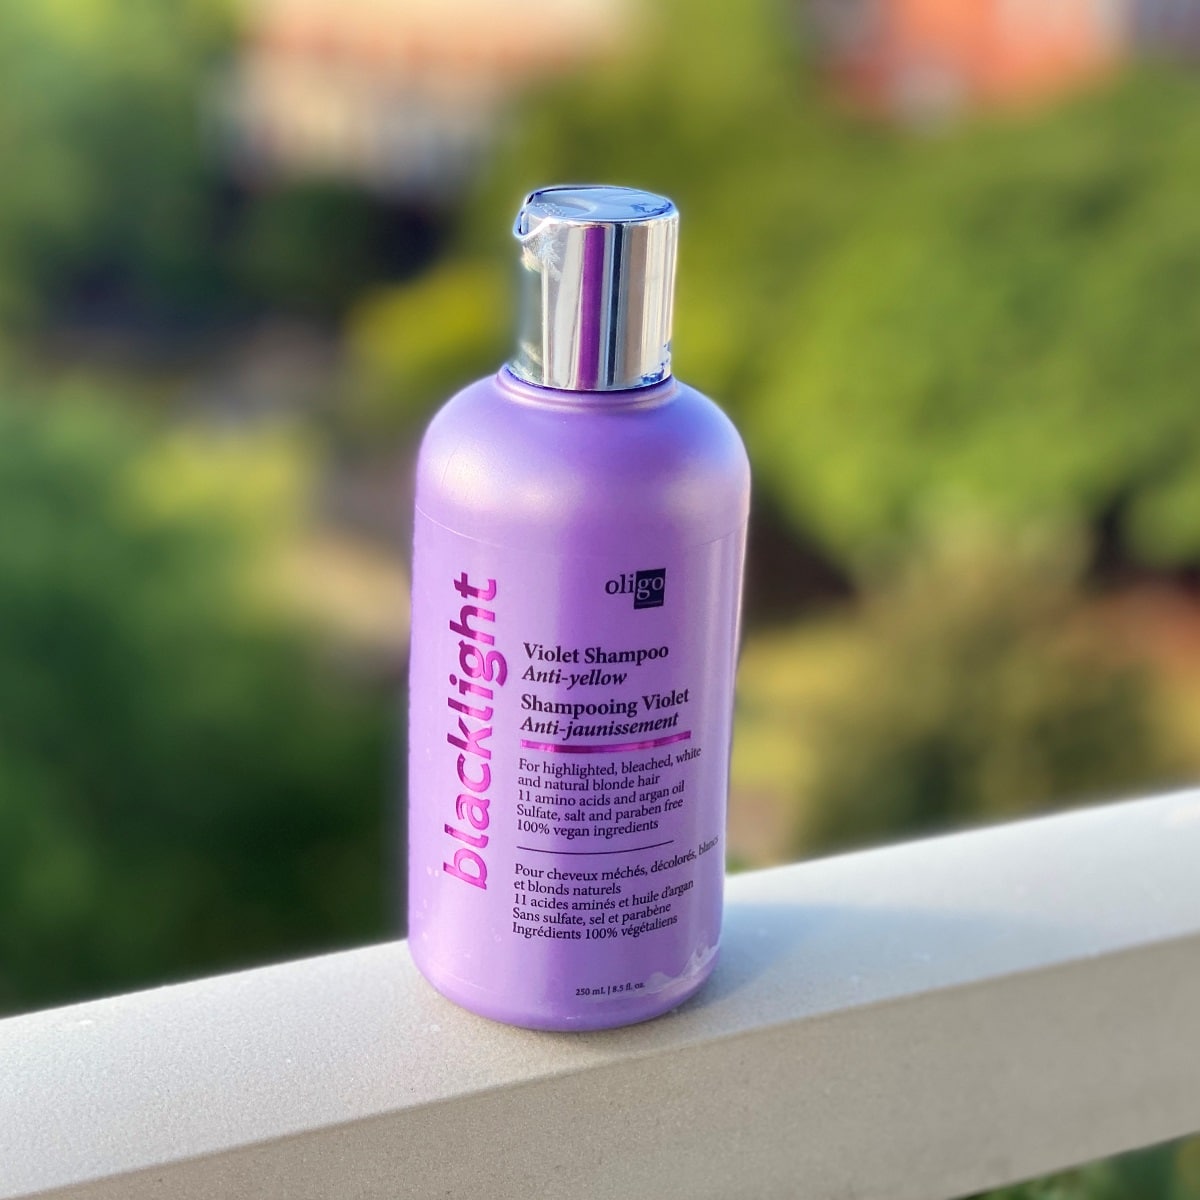 Oligo Professionnel Blacklight Violet Shampoo is the best purple shampoo for blondes to get rid of yellow and orange undertones